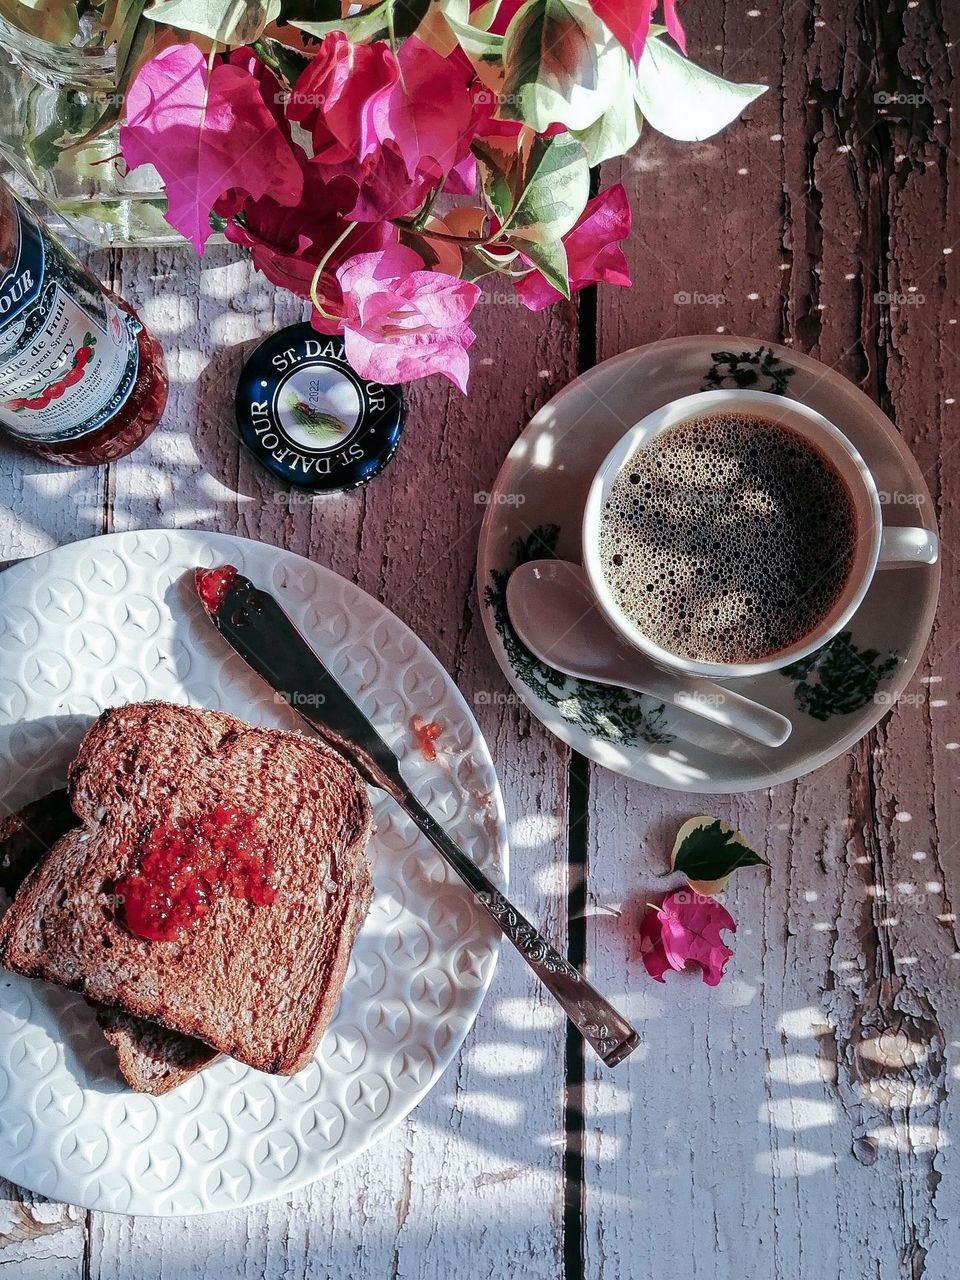 Slice bread, toast bread with strawberry jam served with black coffee for breakfast.